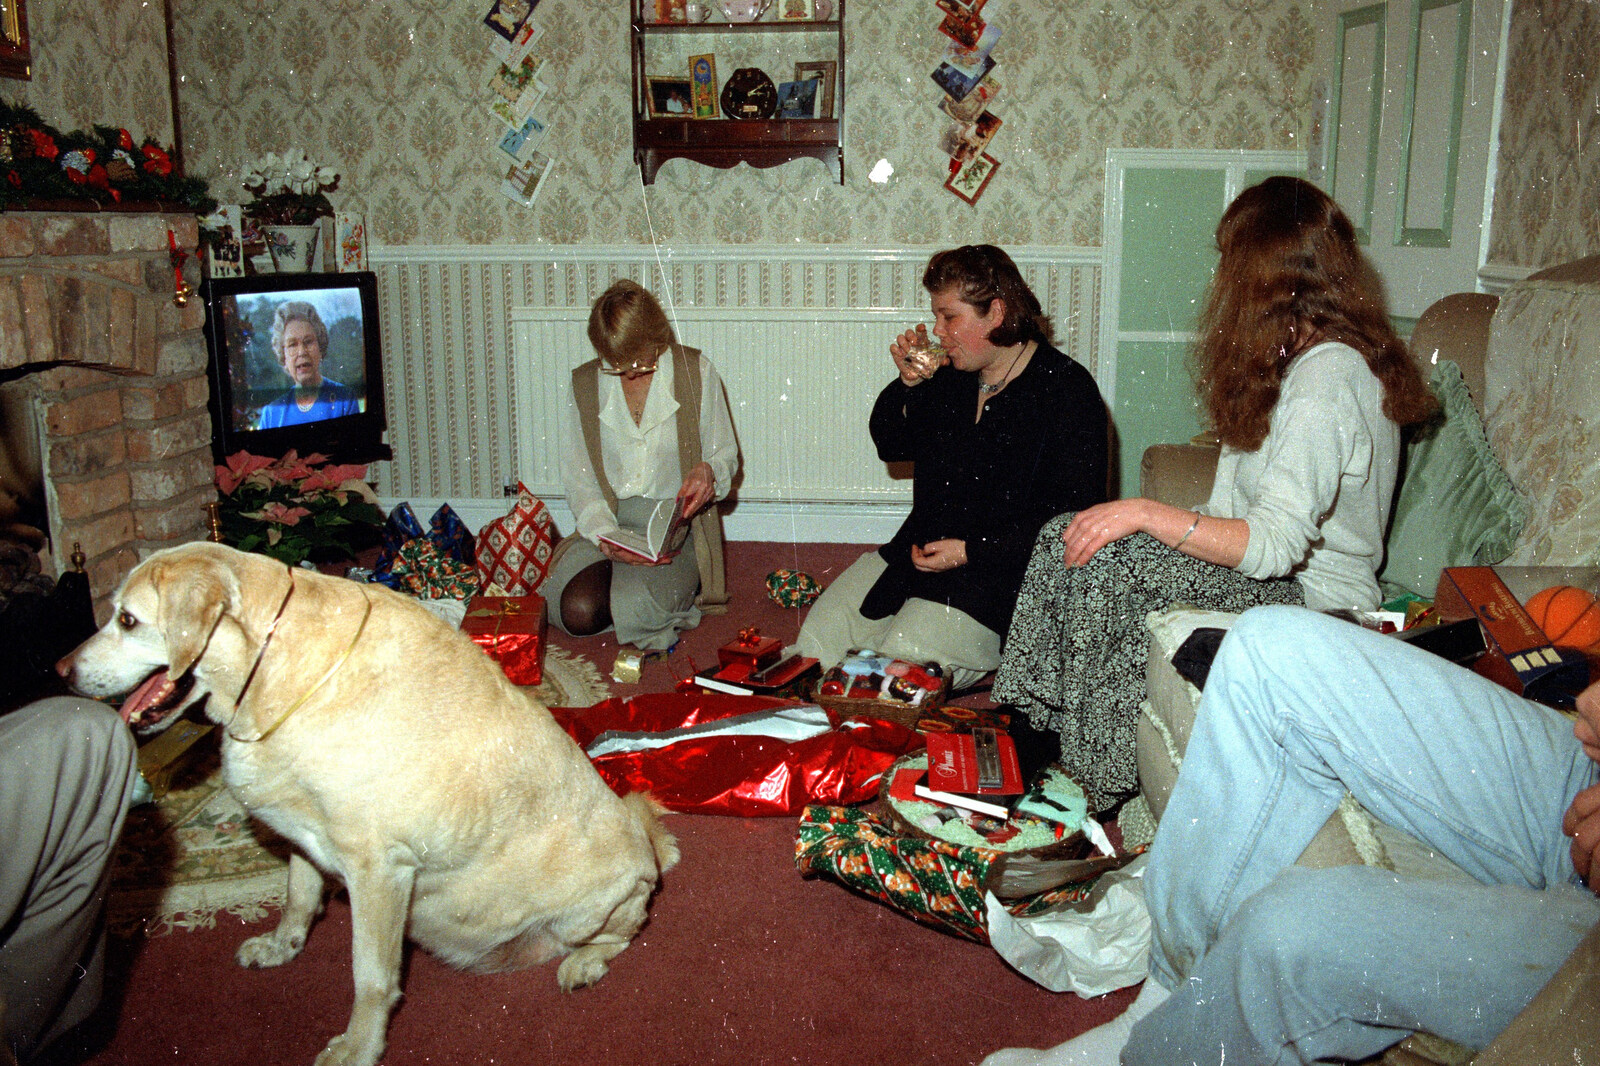 The Queen's on the telly as we unwrap presents from Christmas Up North, Macclesfield, Cheshire - 25th December 1995